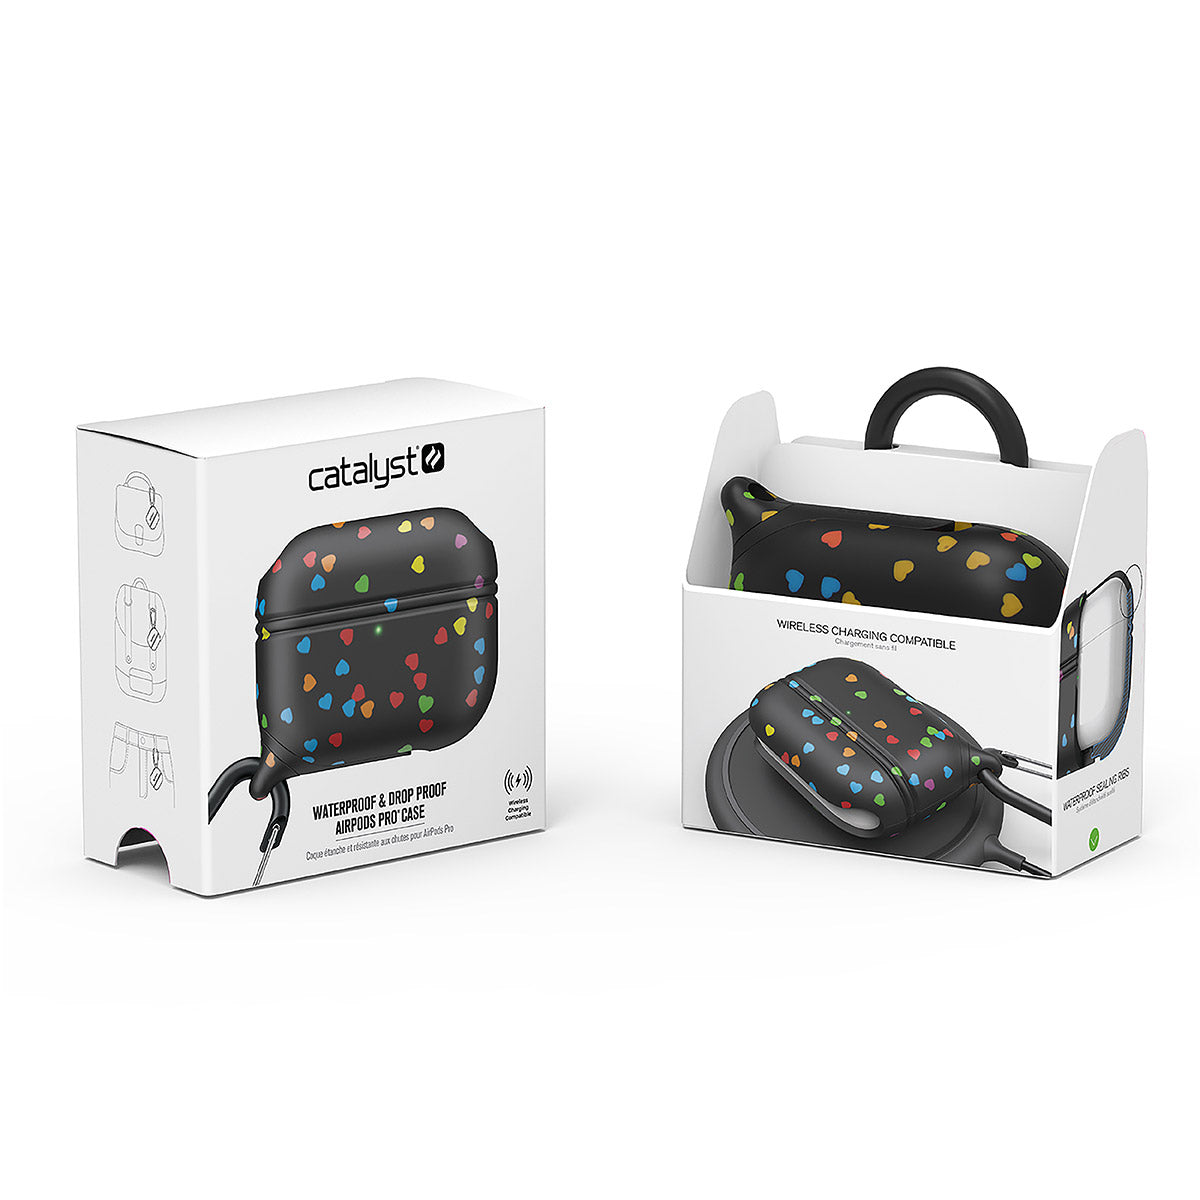 catalyst airpods pro gen 2 1 waterproof case carabiner special edition black with hearts packaging